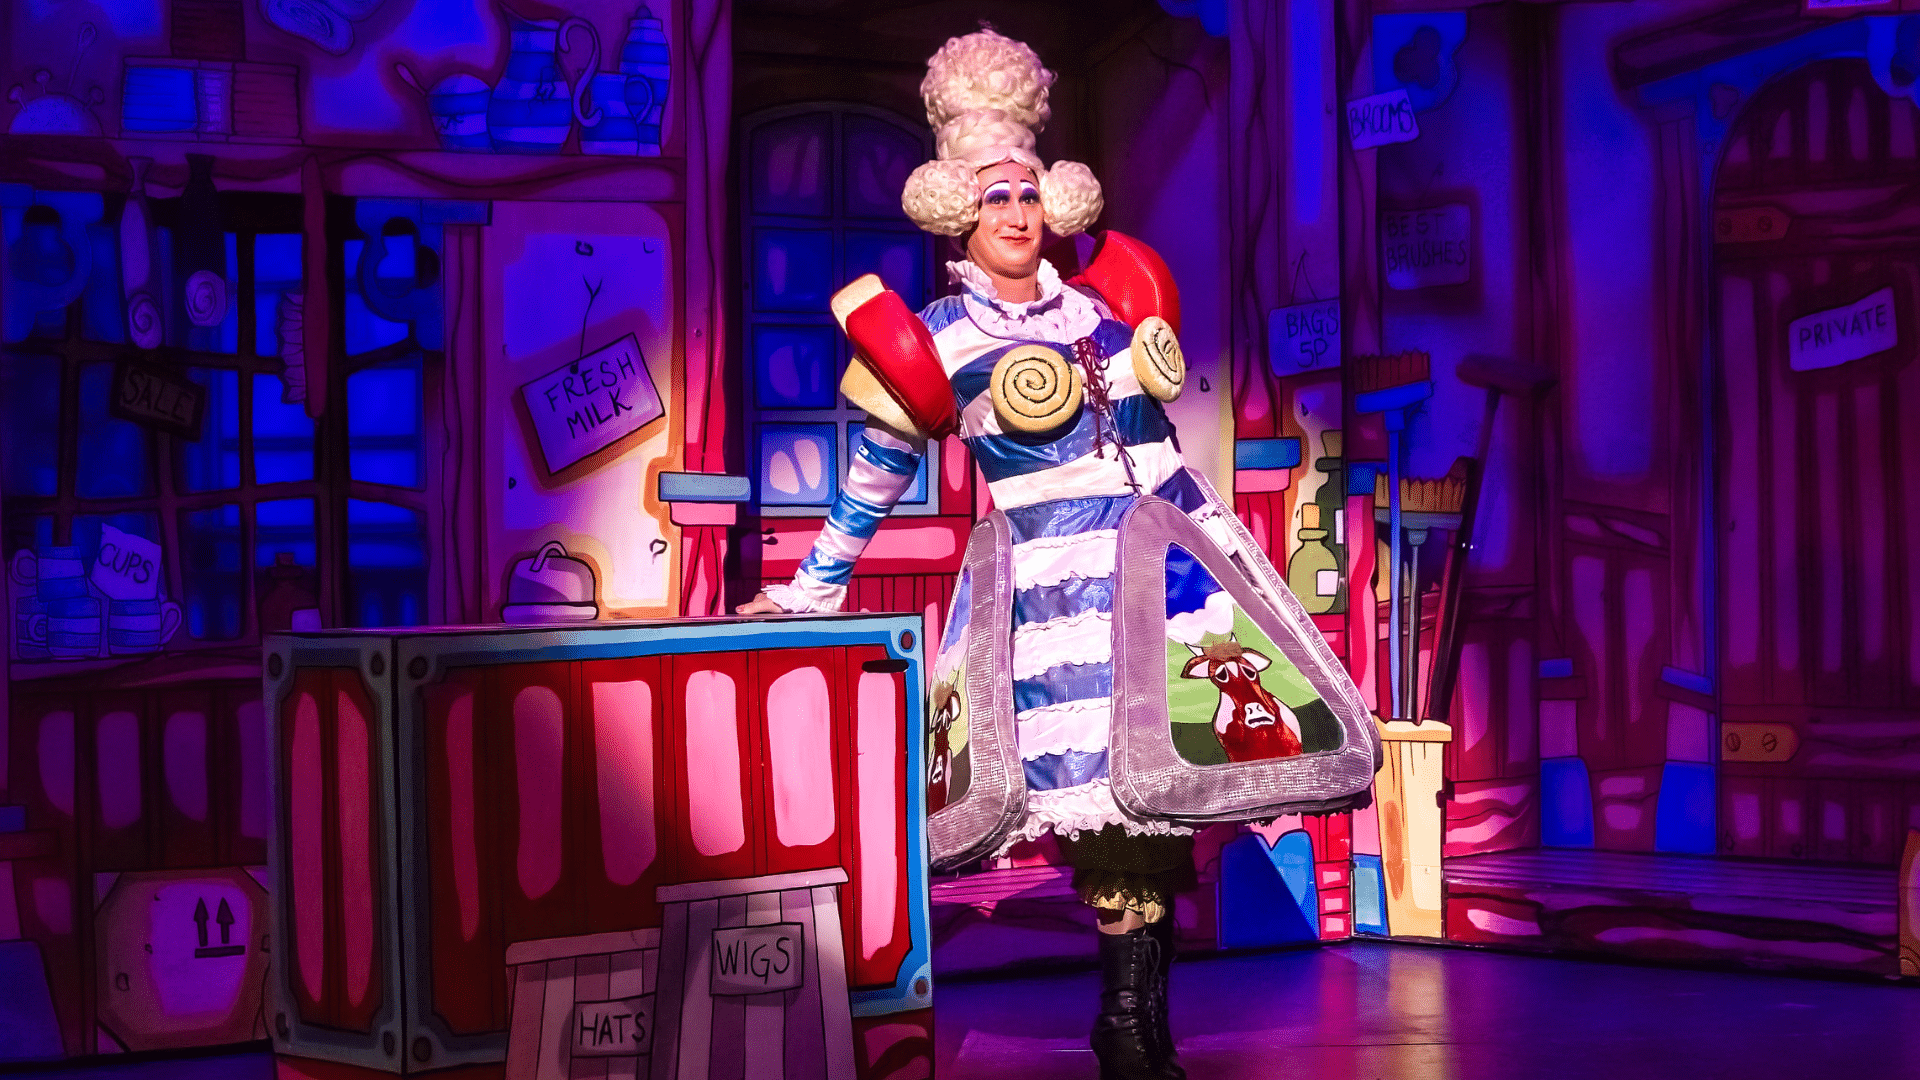 Dick Whittington Production Photo: Sarah Suet (Matt Freeman) leans against a counter in a colourful shop-interior, wearing a globular blonde wig and a dress adorned with cheese triangles.